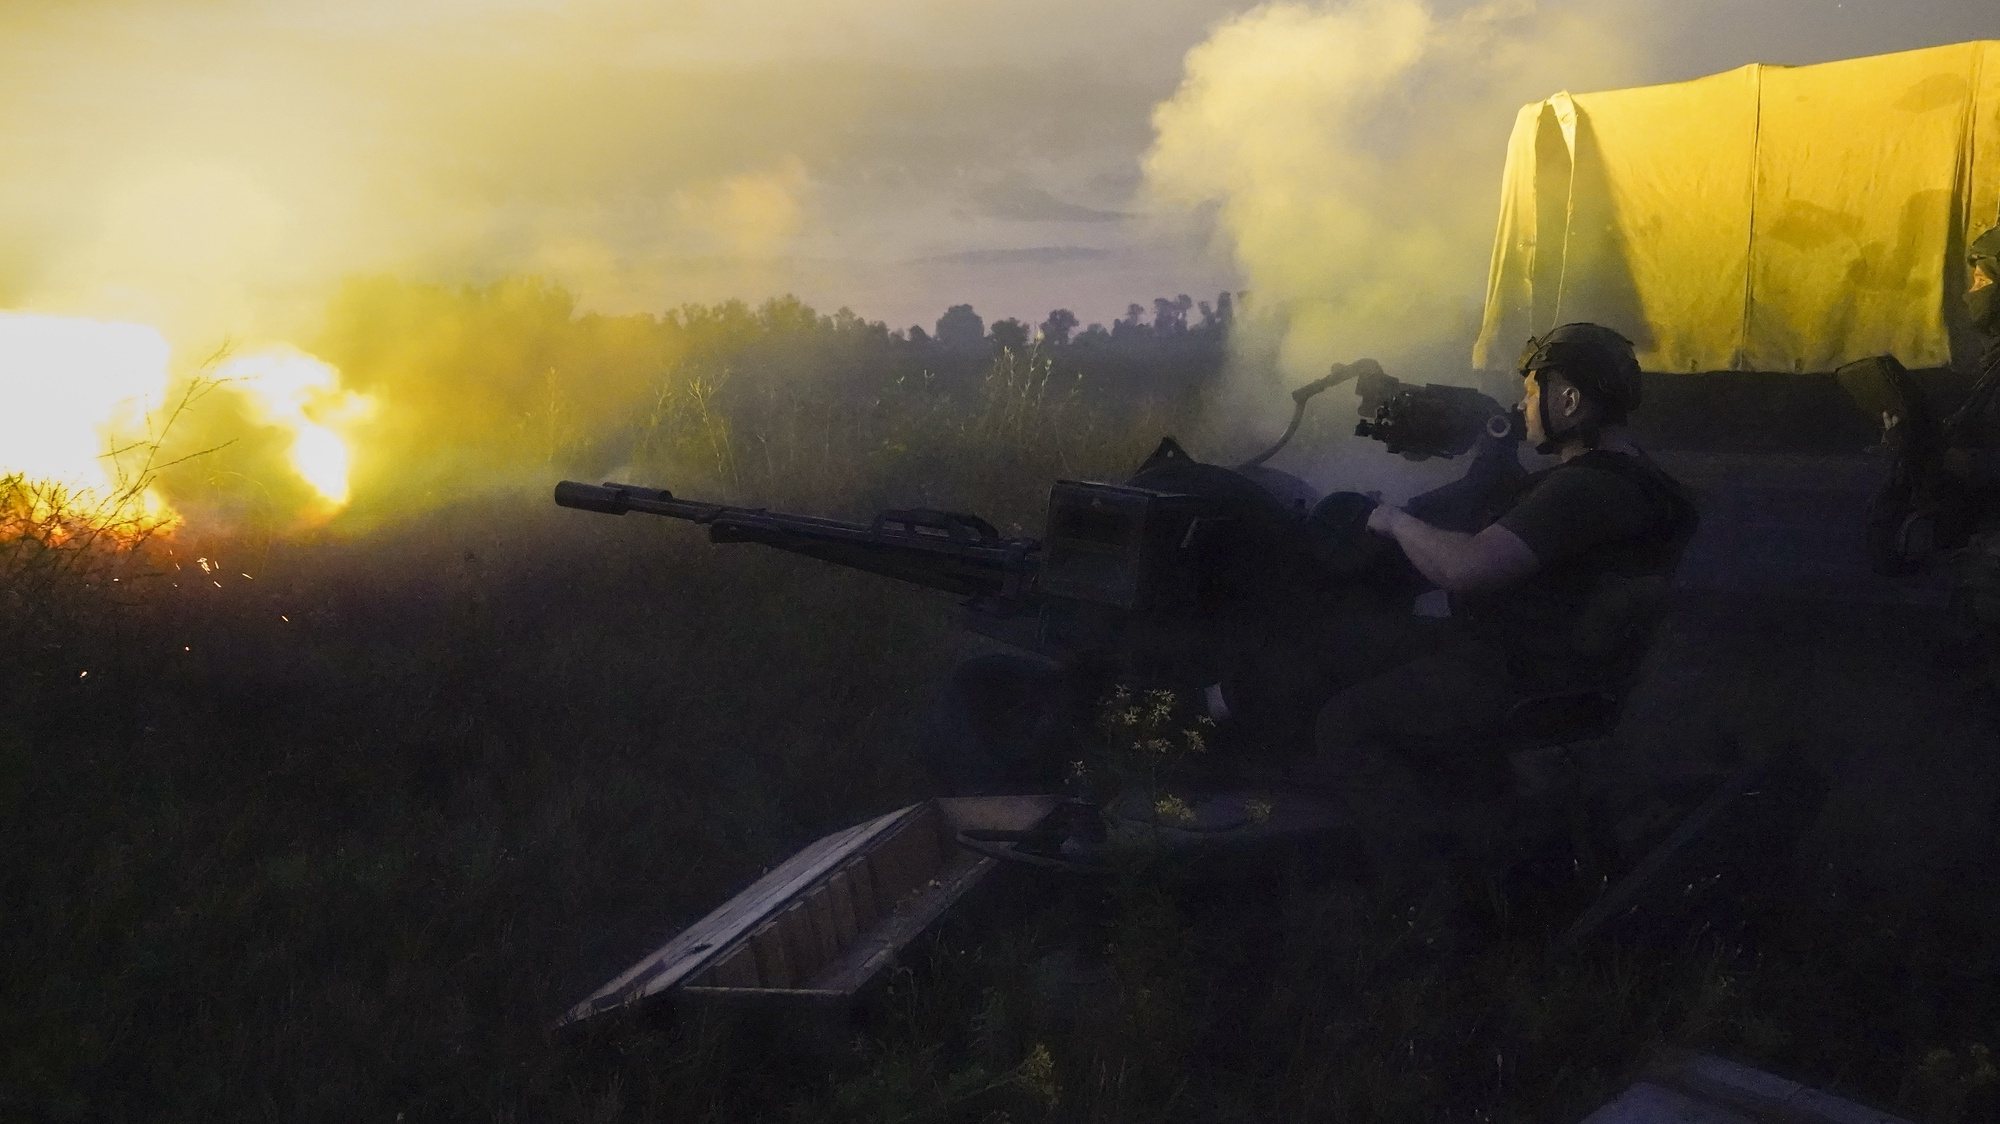 epa10113589 Ukrainian servicemen shoot from an anti-aircraft twin-barreled autocannon Zu-23-2 on a front line in Kharkiv&#039;s area, Ukraine, early morning on 10 August 2022 amid Russia&#039;s military invasion. Russian troops on 24 February entered Ukrainian territory, starting a conflict that has provoked destruction and a humanitarian crisis.  EPA/VASILIY ZHLOBSKY